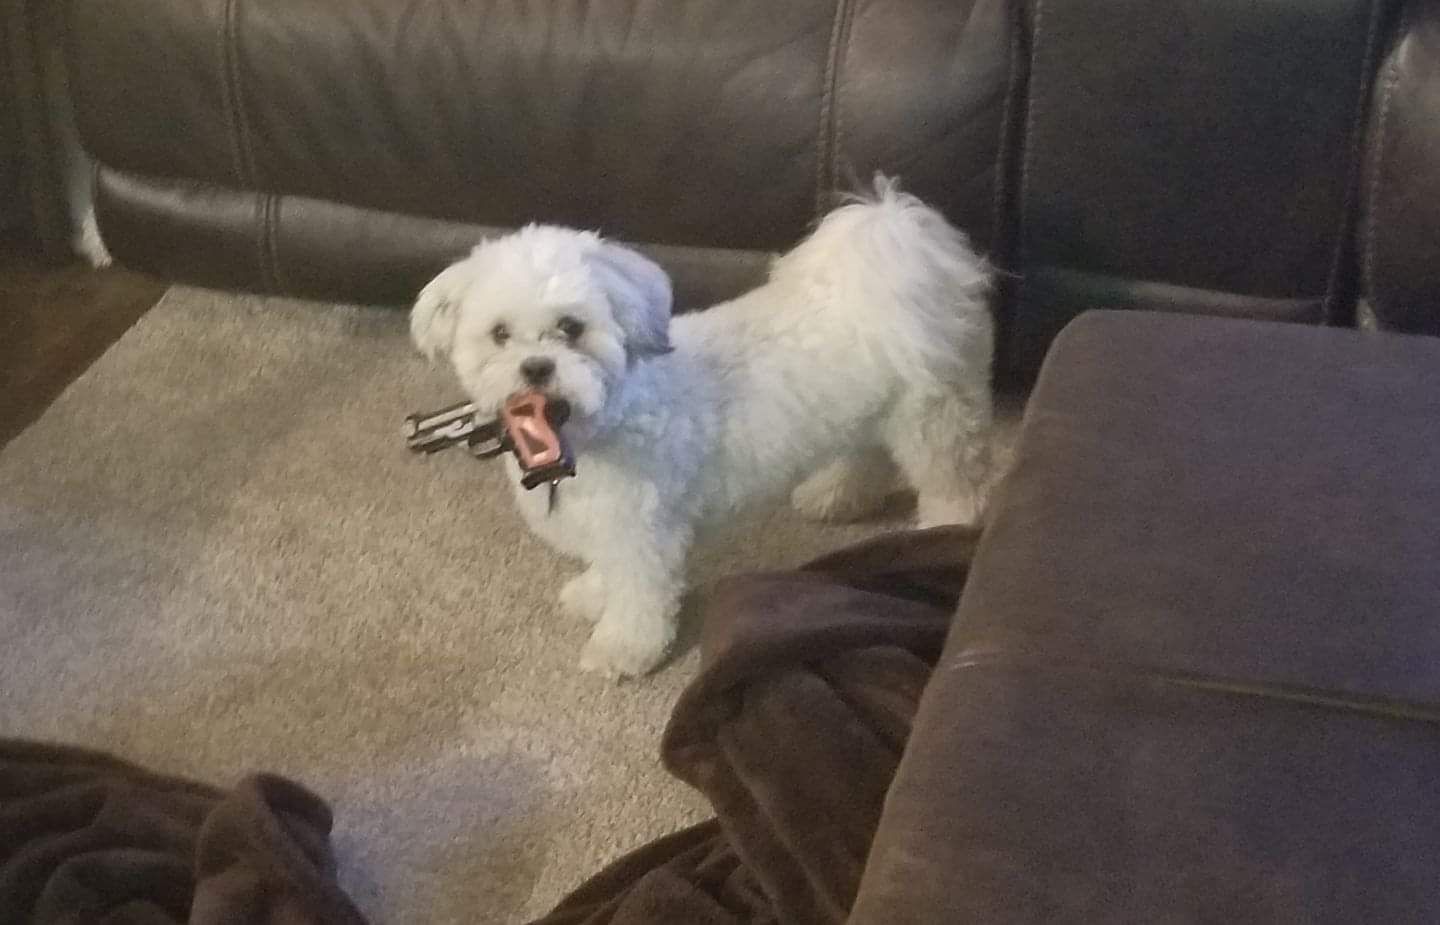 My girlfriends dog is starting to scare me